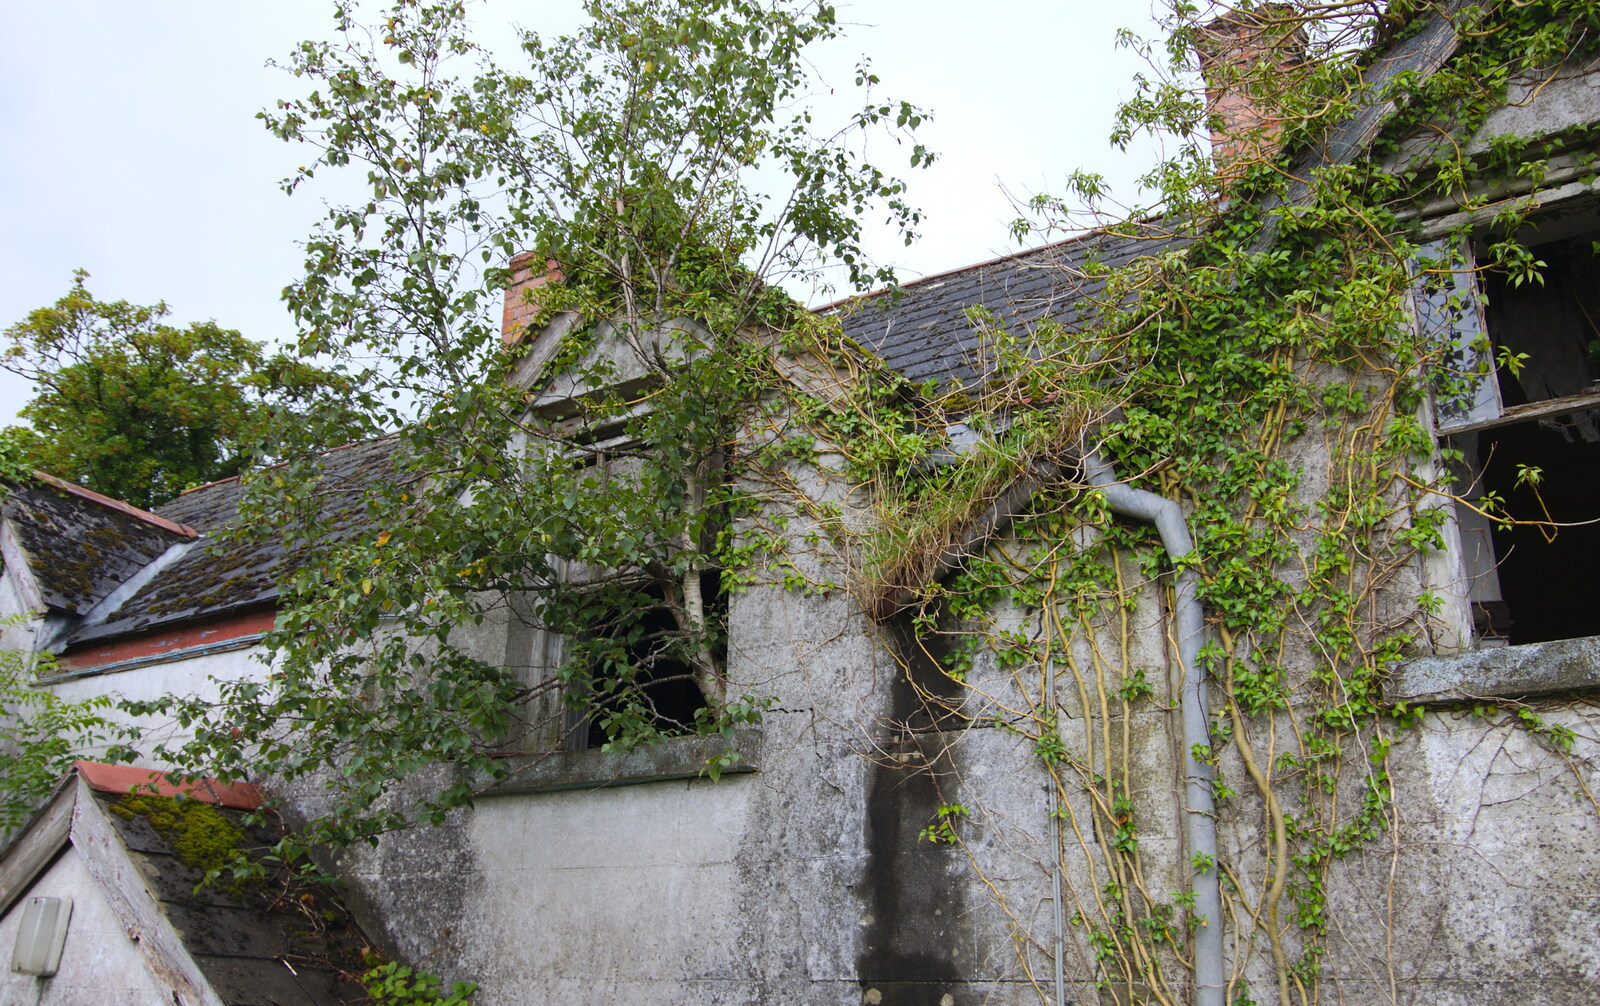 There's a tree growing out of the upstairs window from Travels in the Borderlands: An Blaic/Blacklion to Belcoo and back, Cavan and Fermanagh, Ireland - 22nd August 2019